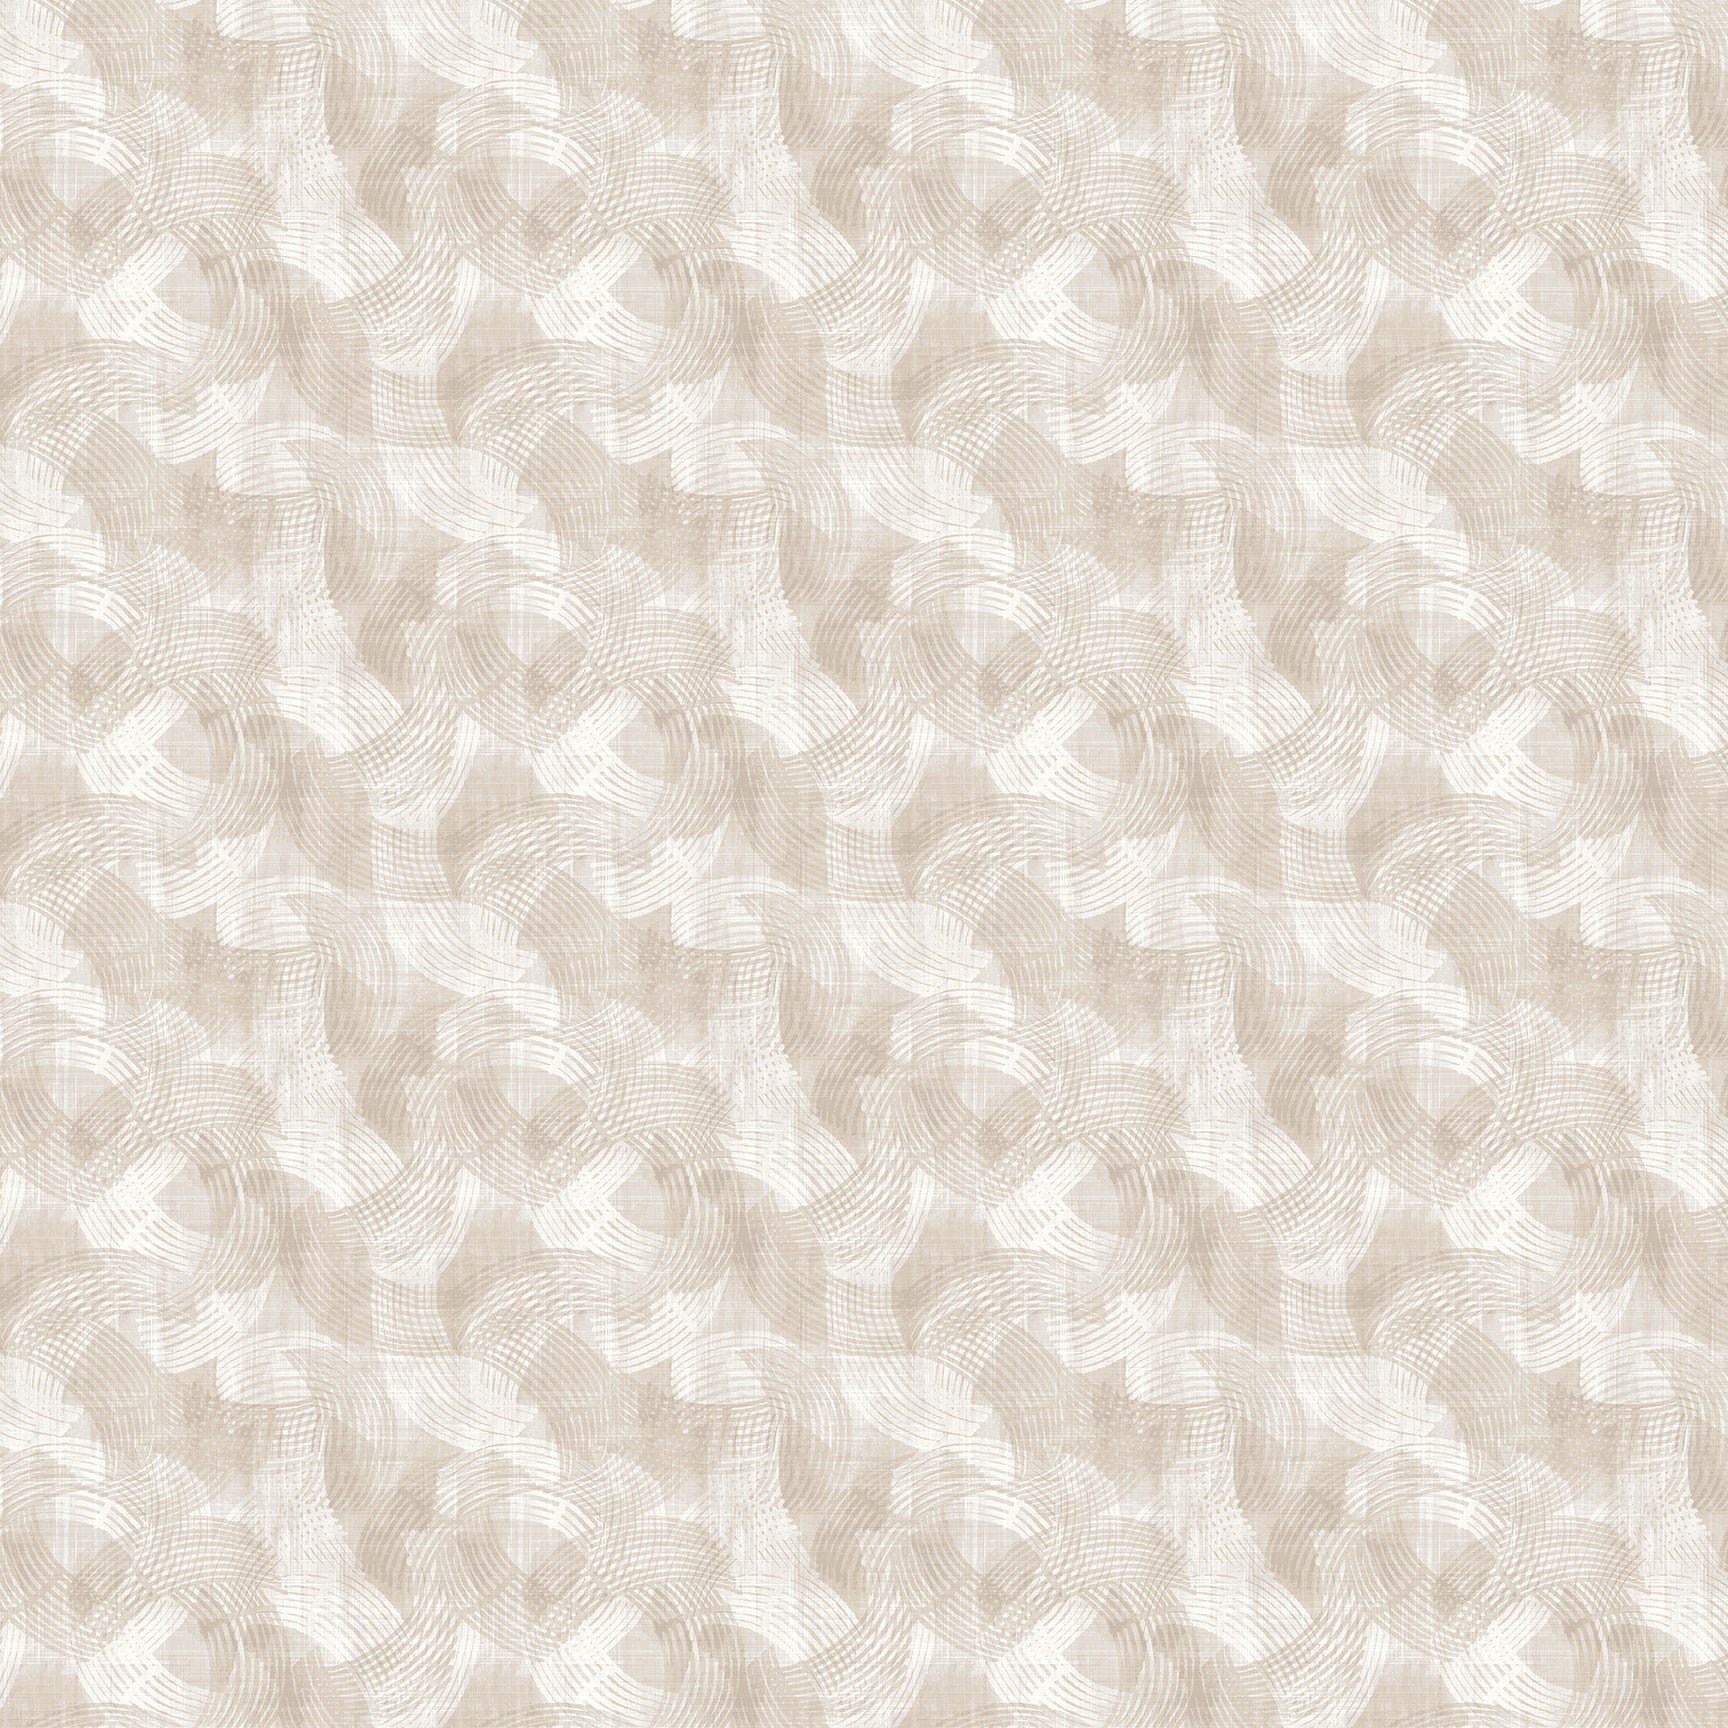 108" Crescent Quilt Backing Fabric - Textured Arcs in Ivory - 2970-41